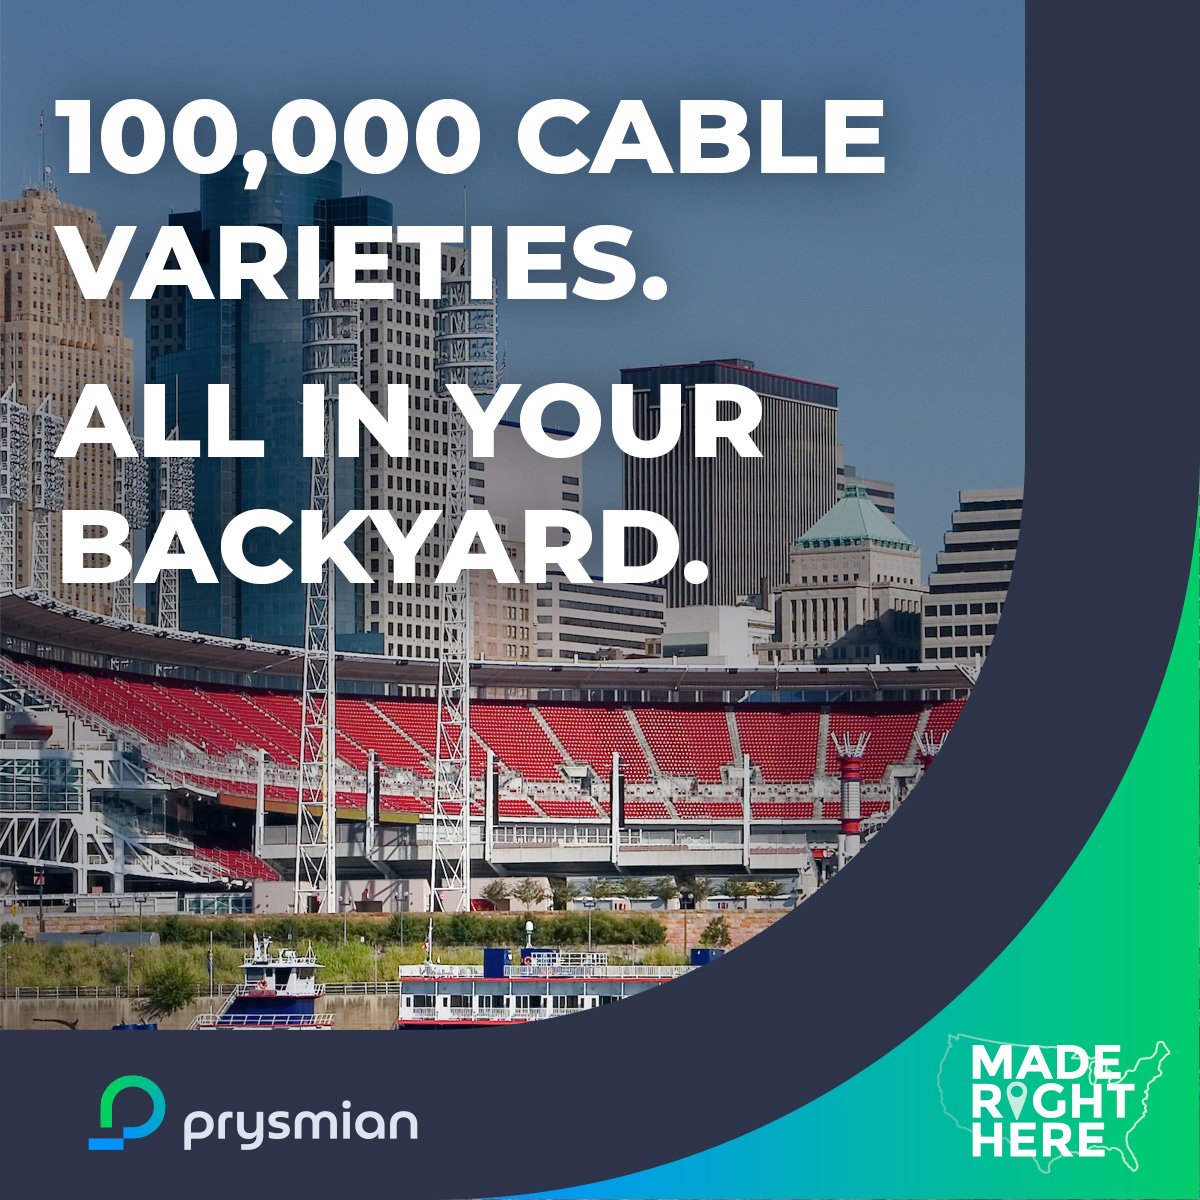 Prysmian has over 100,000 varieties of cable options to meet the diverse needs of our customers. That’s like filling every seat in the Great American Ball Park—located down the street from our HQ in Cincinnati, OH—almost 2.5 times! Don’t strike out with other cable products.…